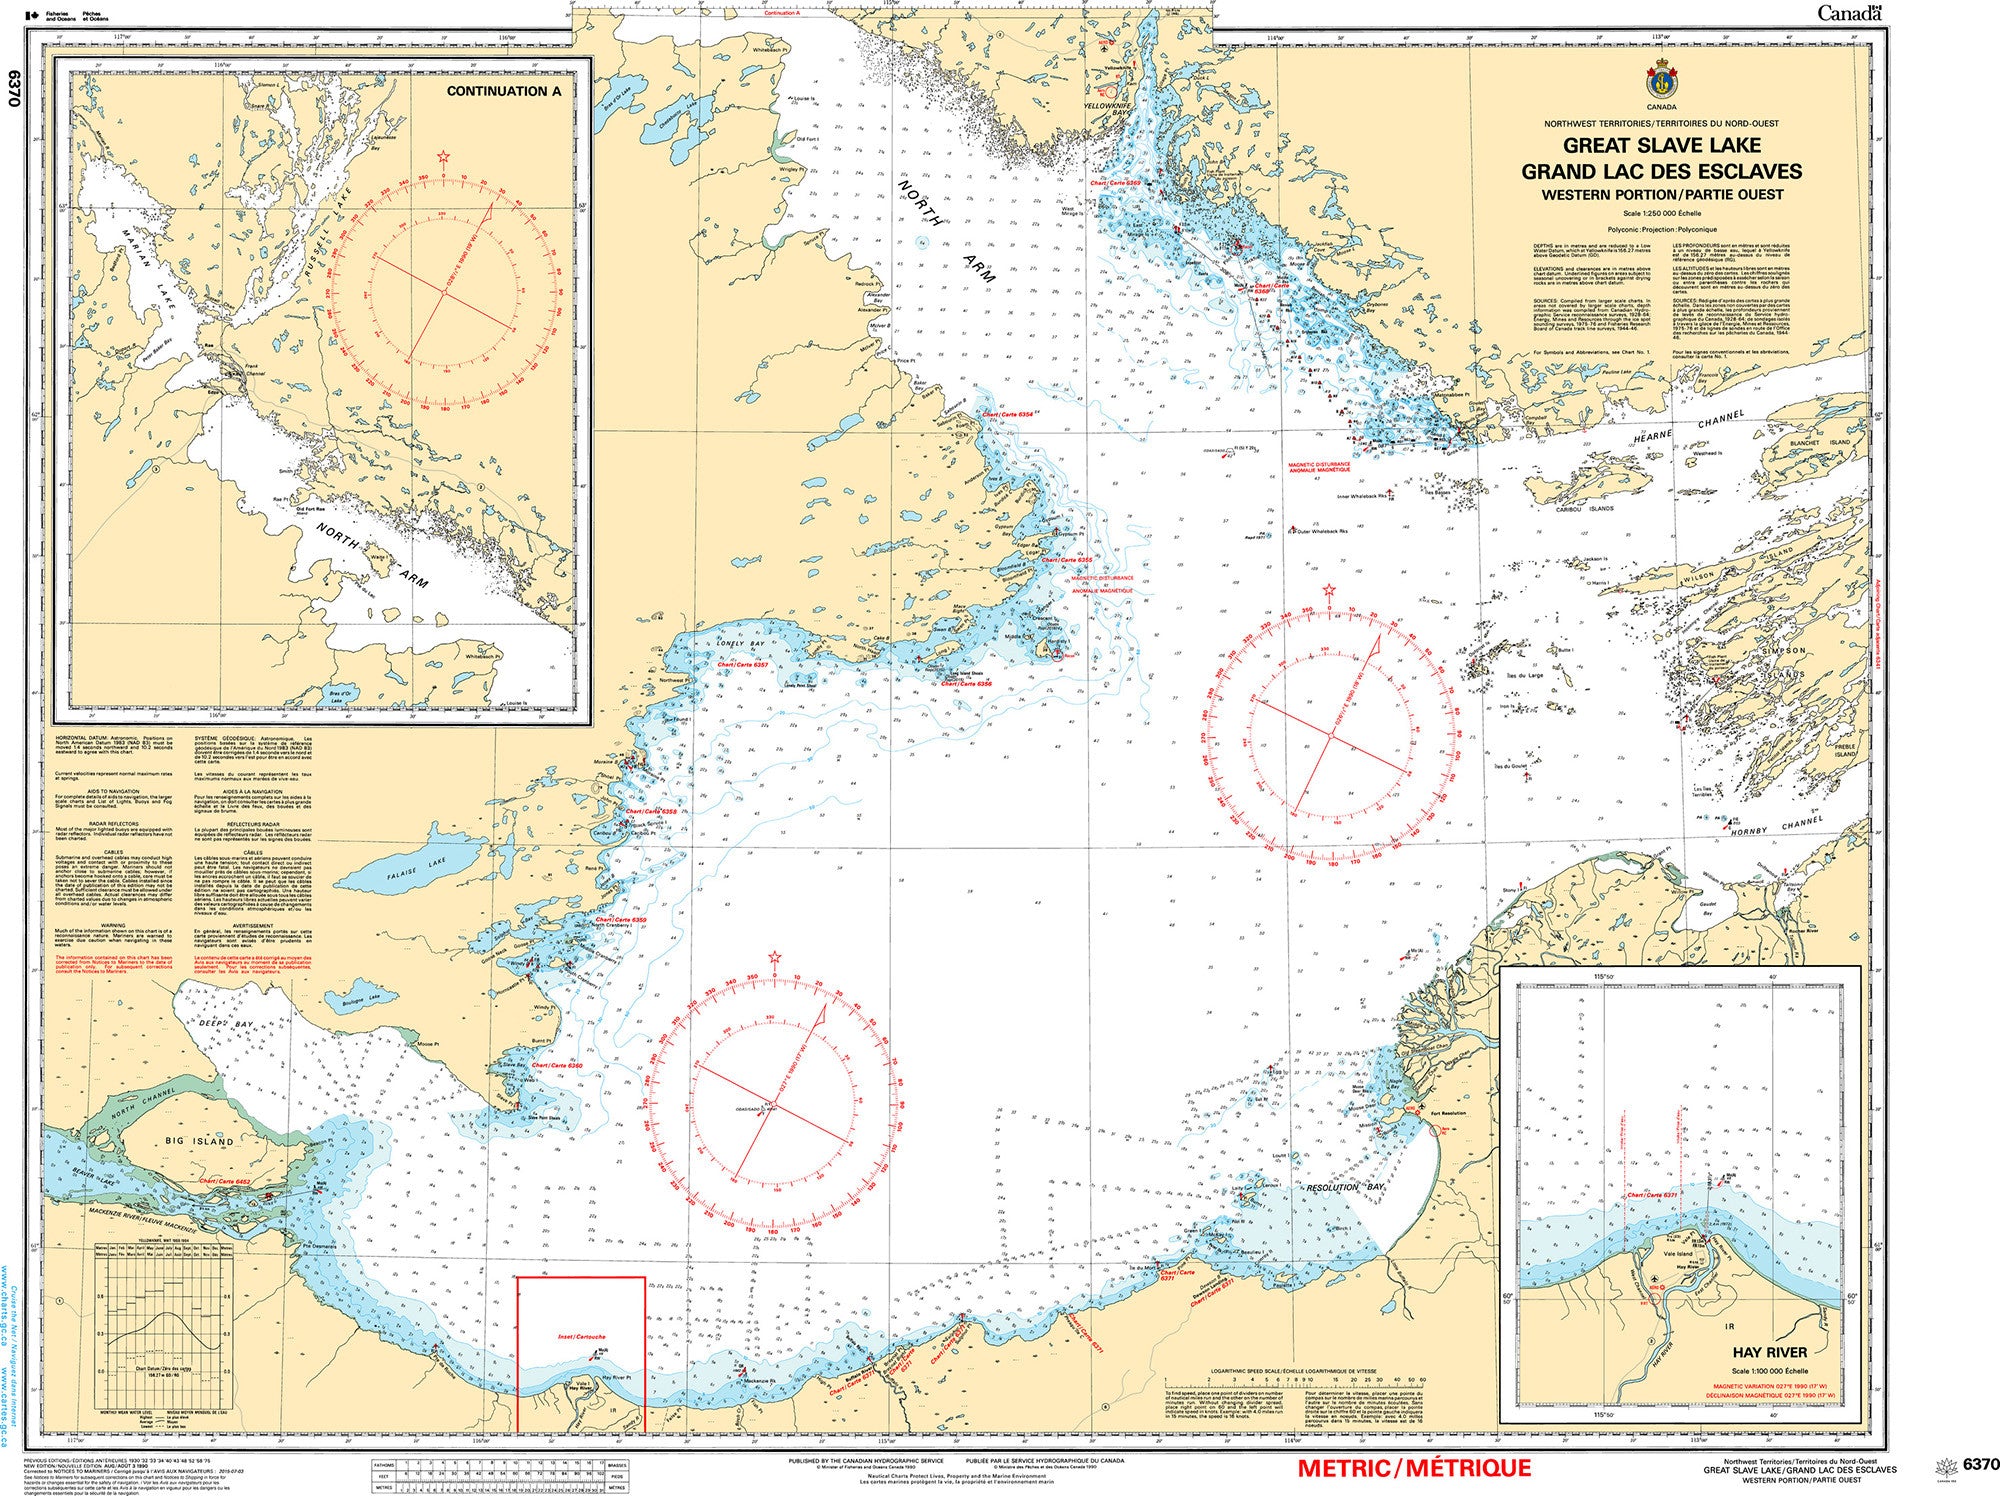 Canadian Hydrographic Service Nautical Chart CHS6370: Great Slave Lake / Grand lac des Esclaves, Western Portion / Partie ouest